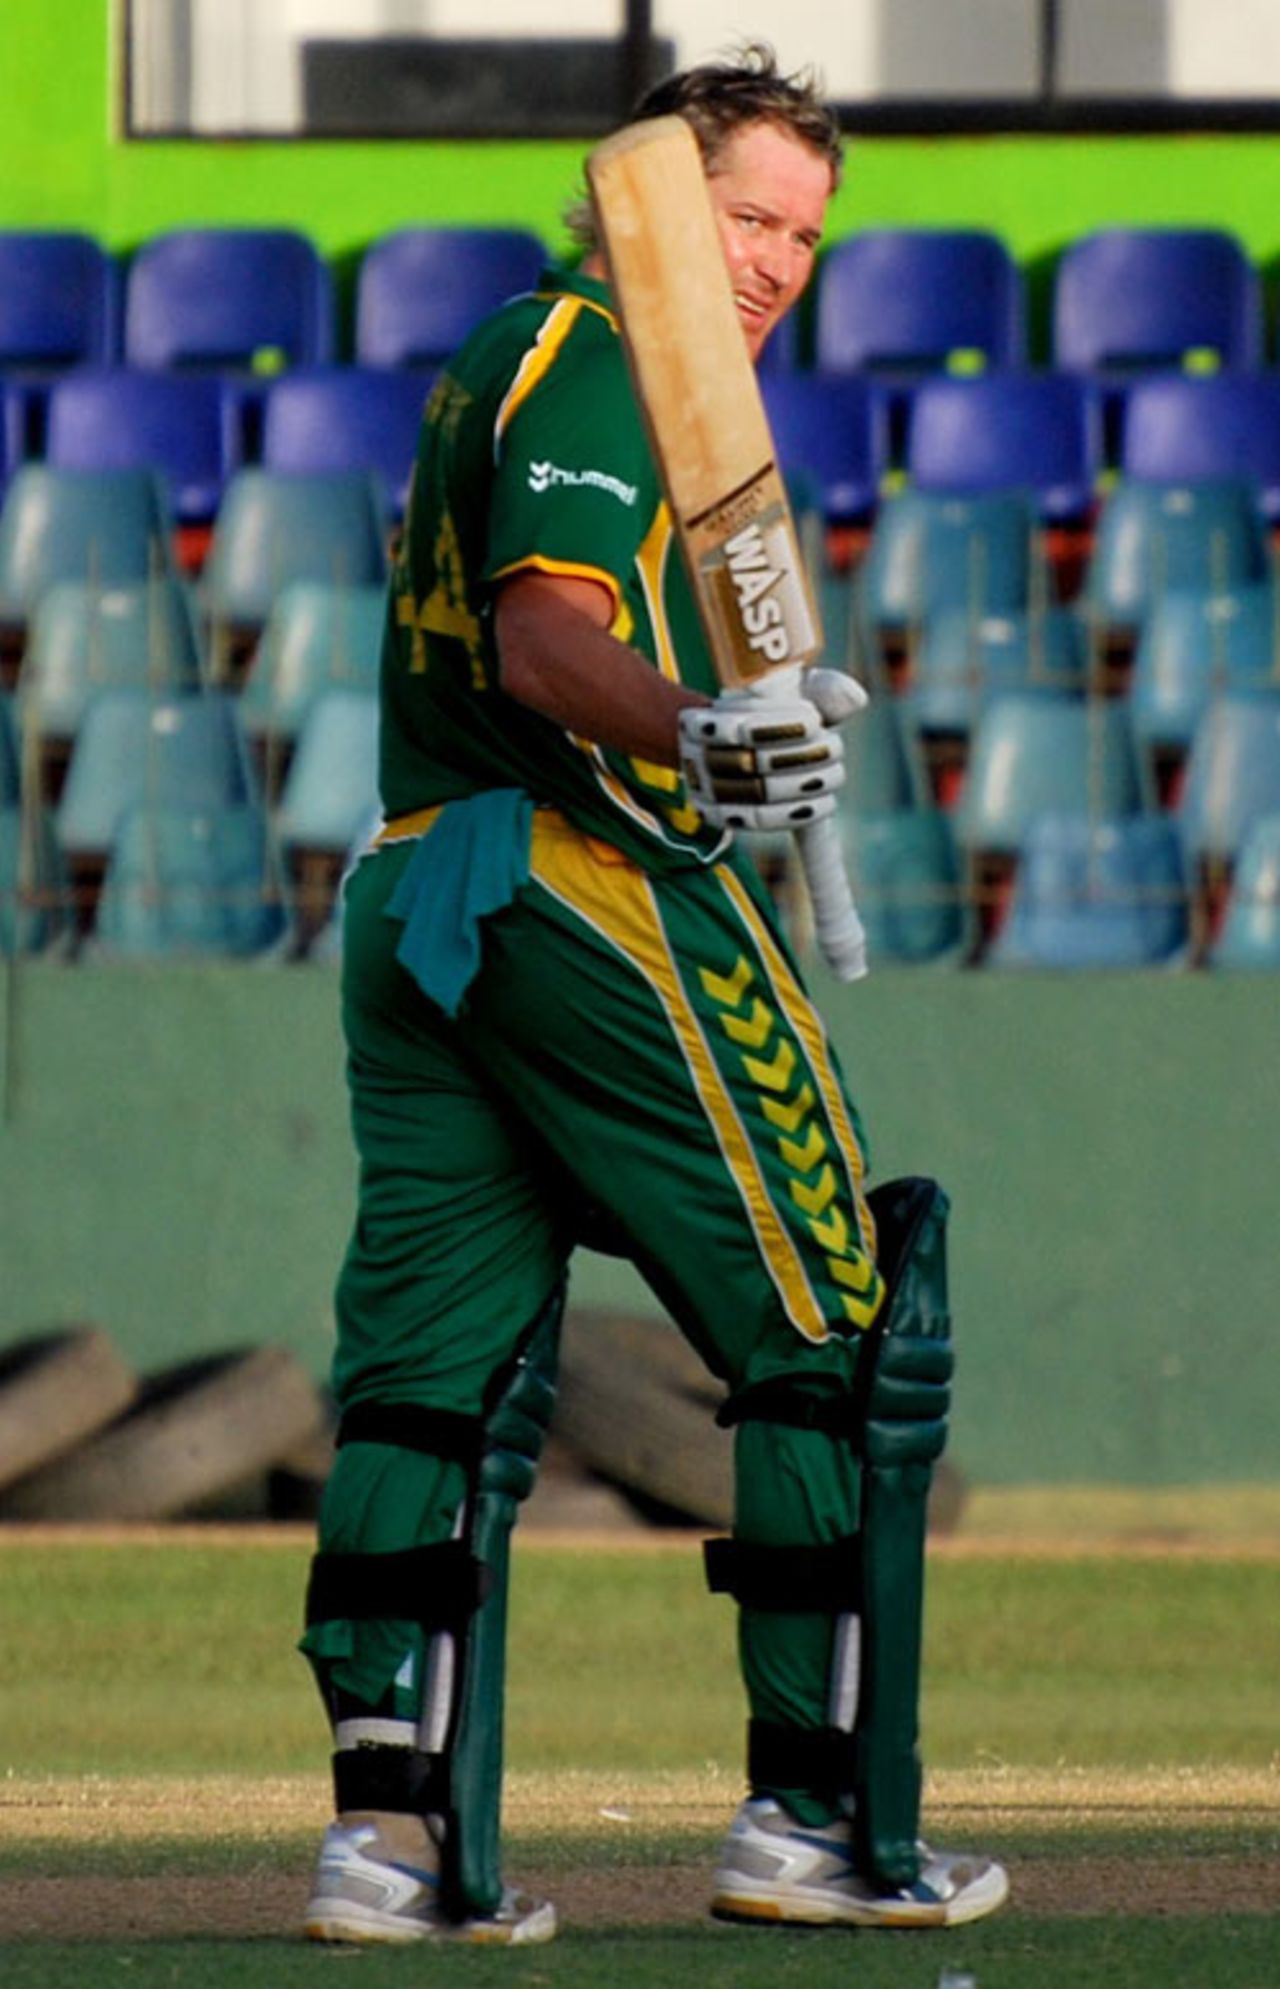 Morne van Wyk's century steered South Africa A to the title, Sri Lanka A v South Africa A, tri-series final, SSC, Colombo, September 6, 2010